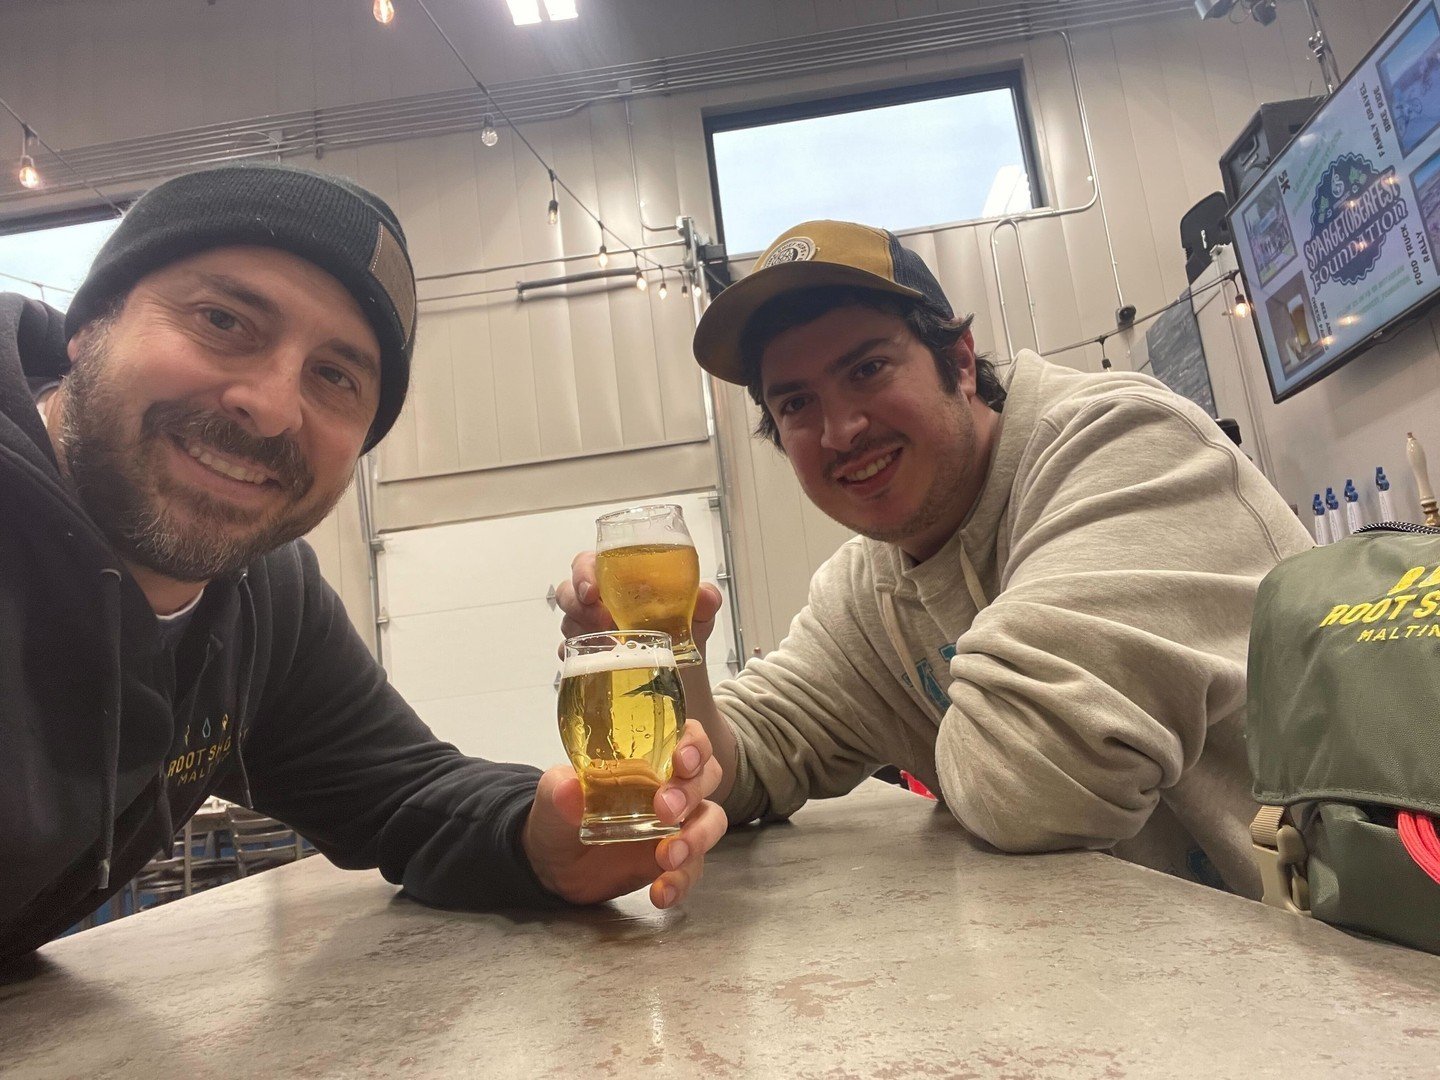 🍻Shout out to our friends up north in Wellington @spargebrew! 

🙏Sparge Brewing has been a Root Shoot supporter since its inception in 2019.
They created The Spargetoberfest Foundation that supports the American Legion Wellington Post 176, The Well